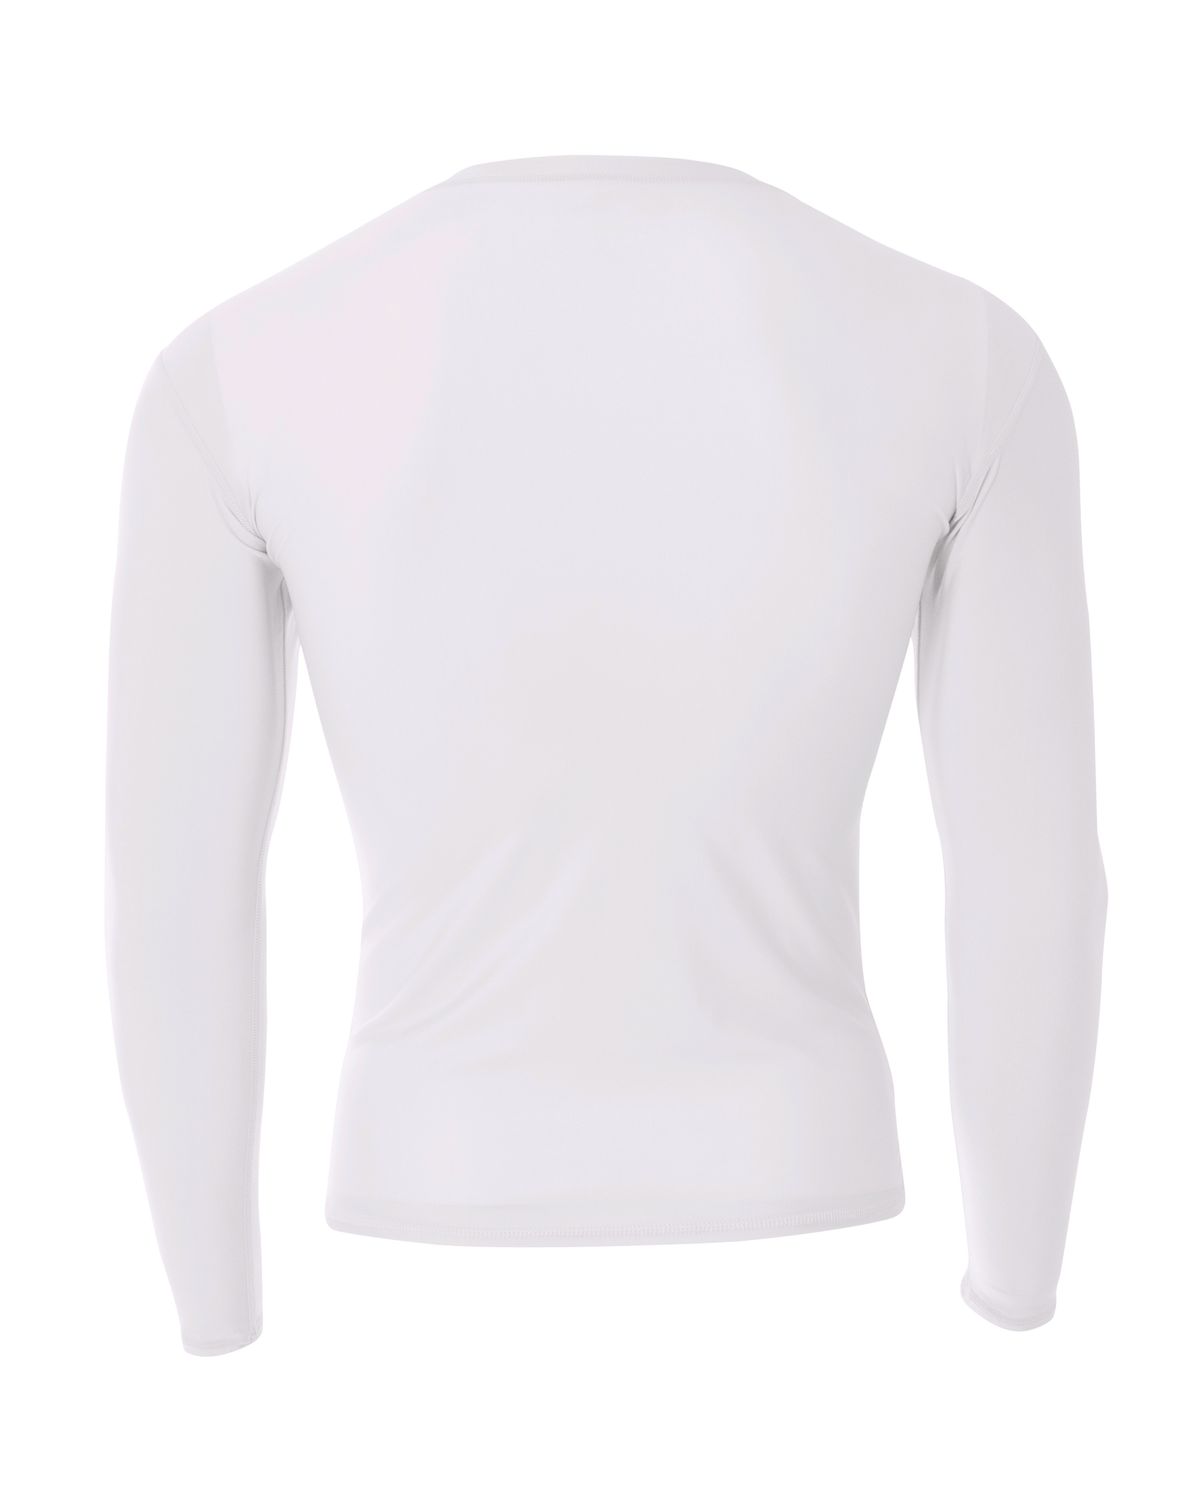 'A4 NB3133 Youth Long Sleeve Compression Crew'